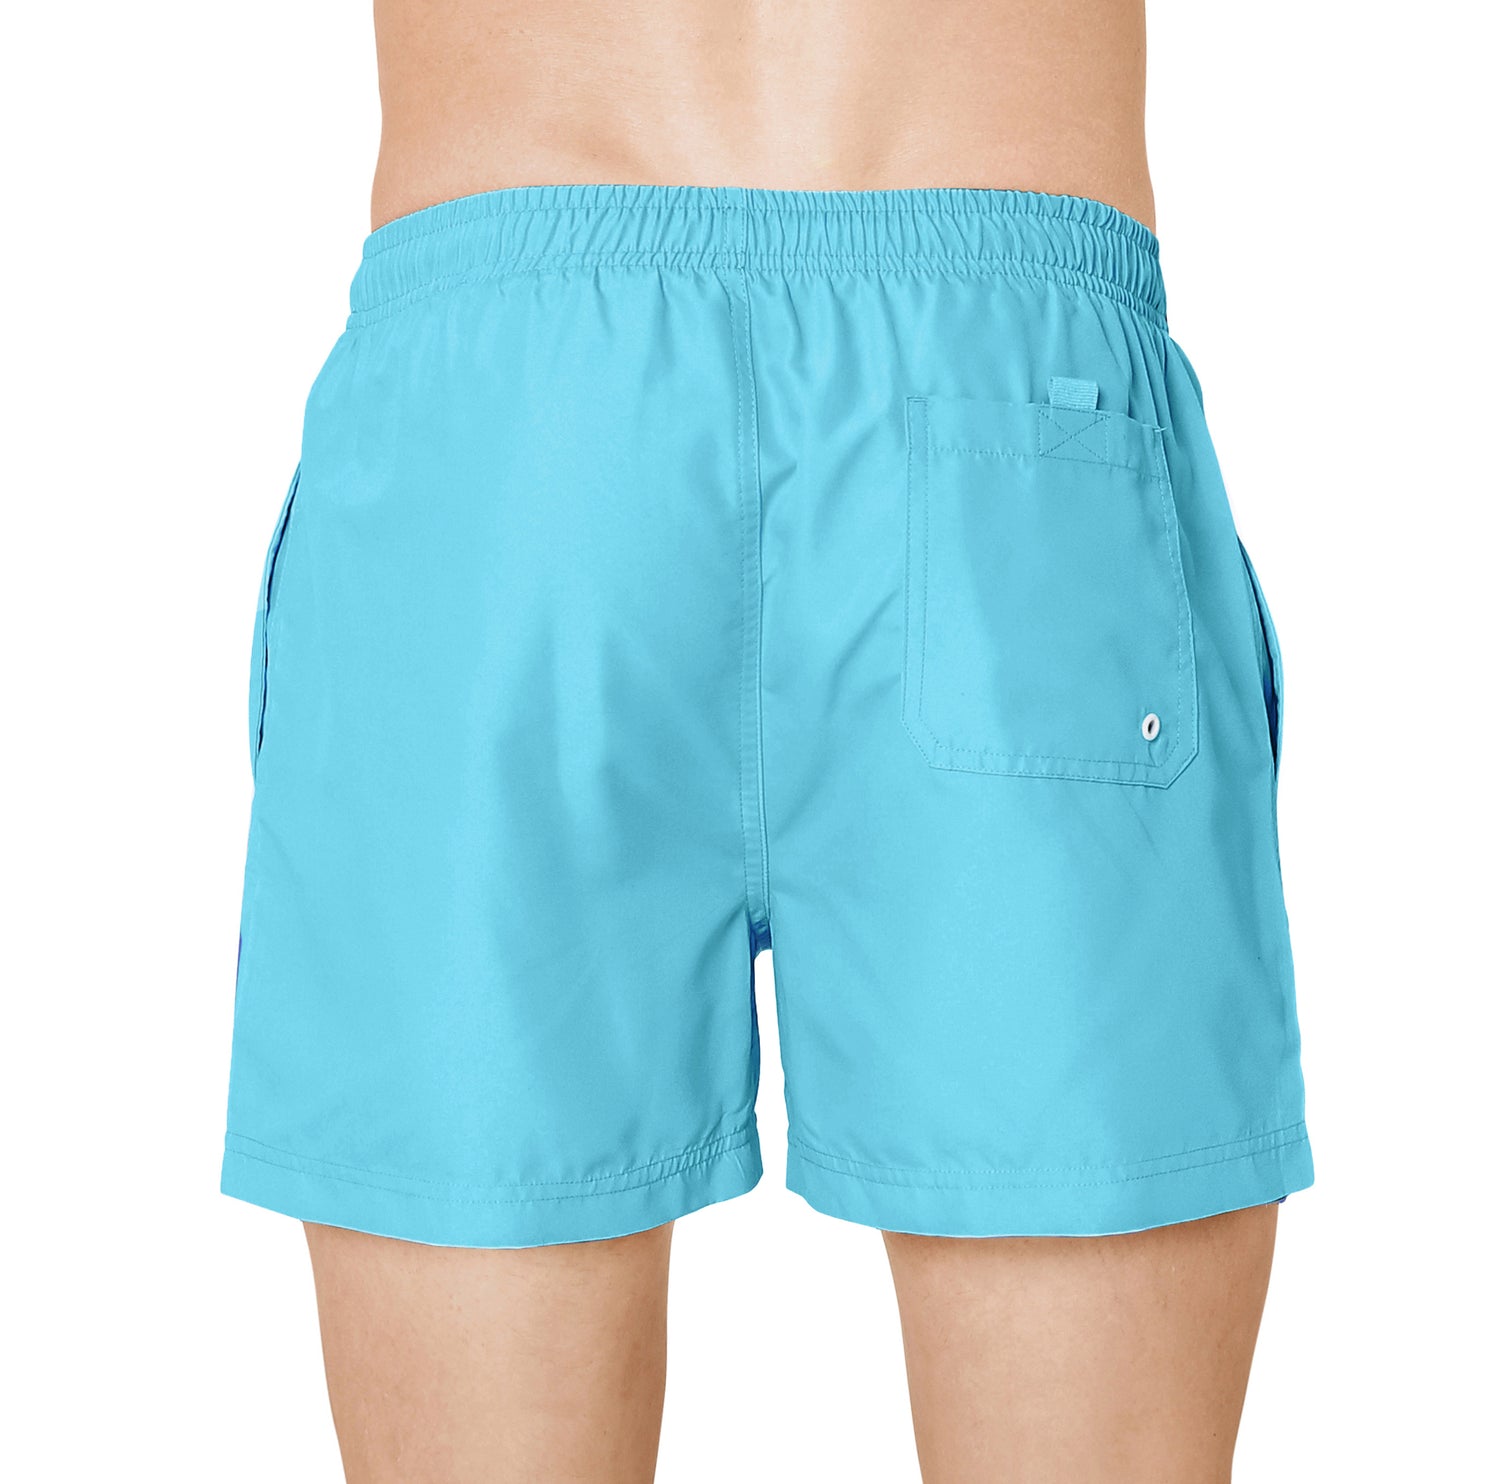 Swim shorts with mesh lining, TURQUOISE color. With travel pouch!